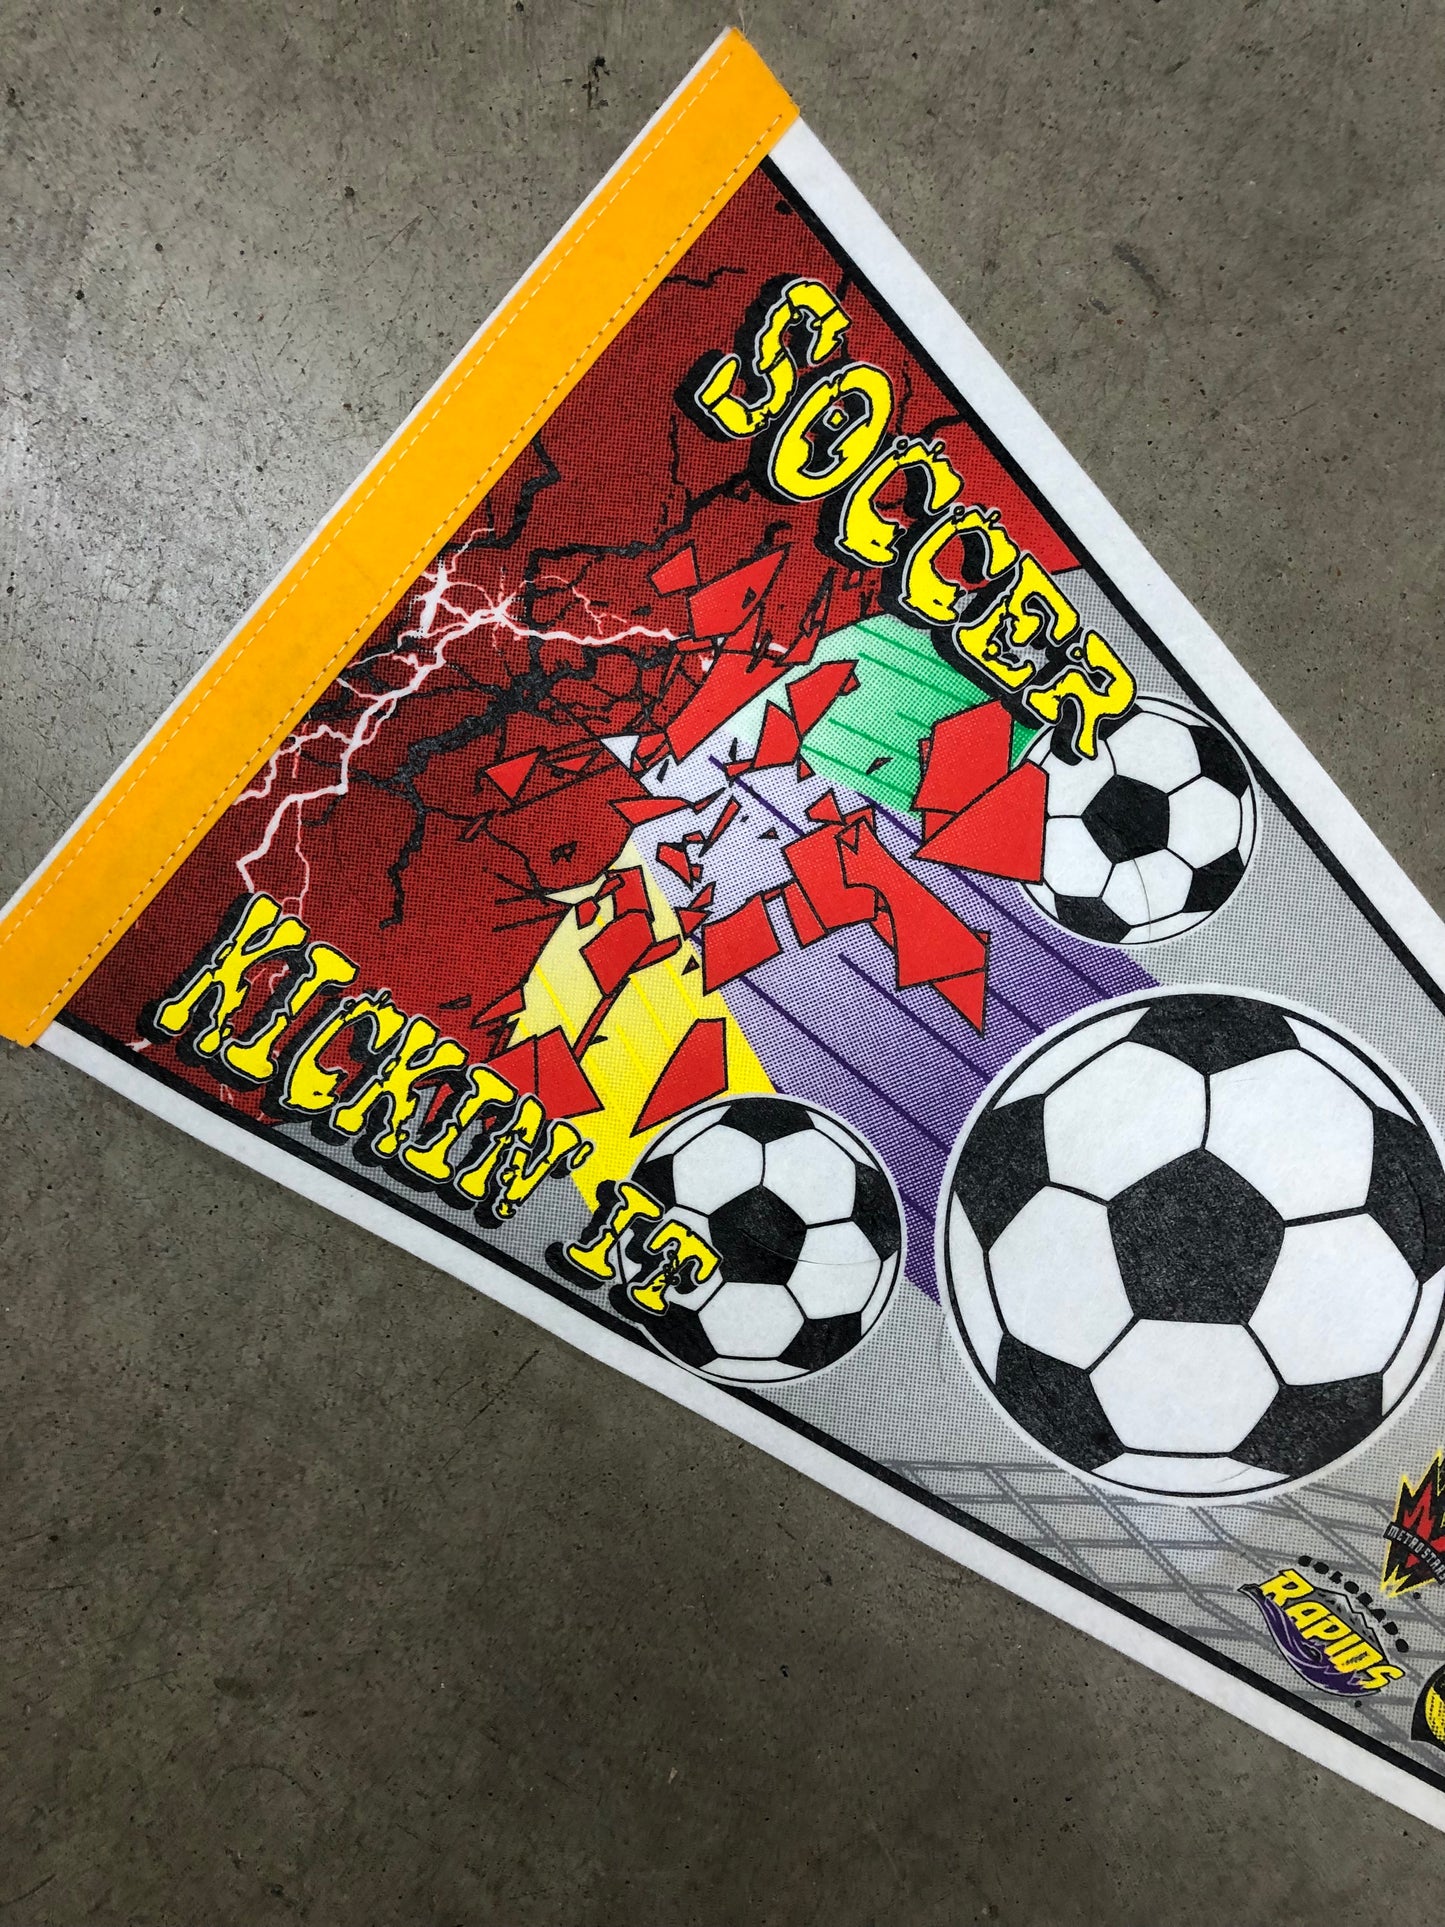 Official MLS Licensed Product Soccer Kickn' It Pennant Sz 12x29